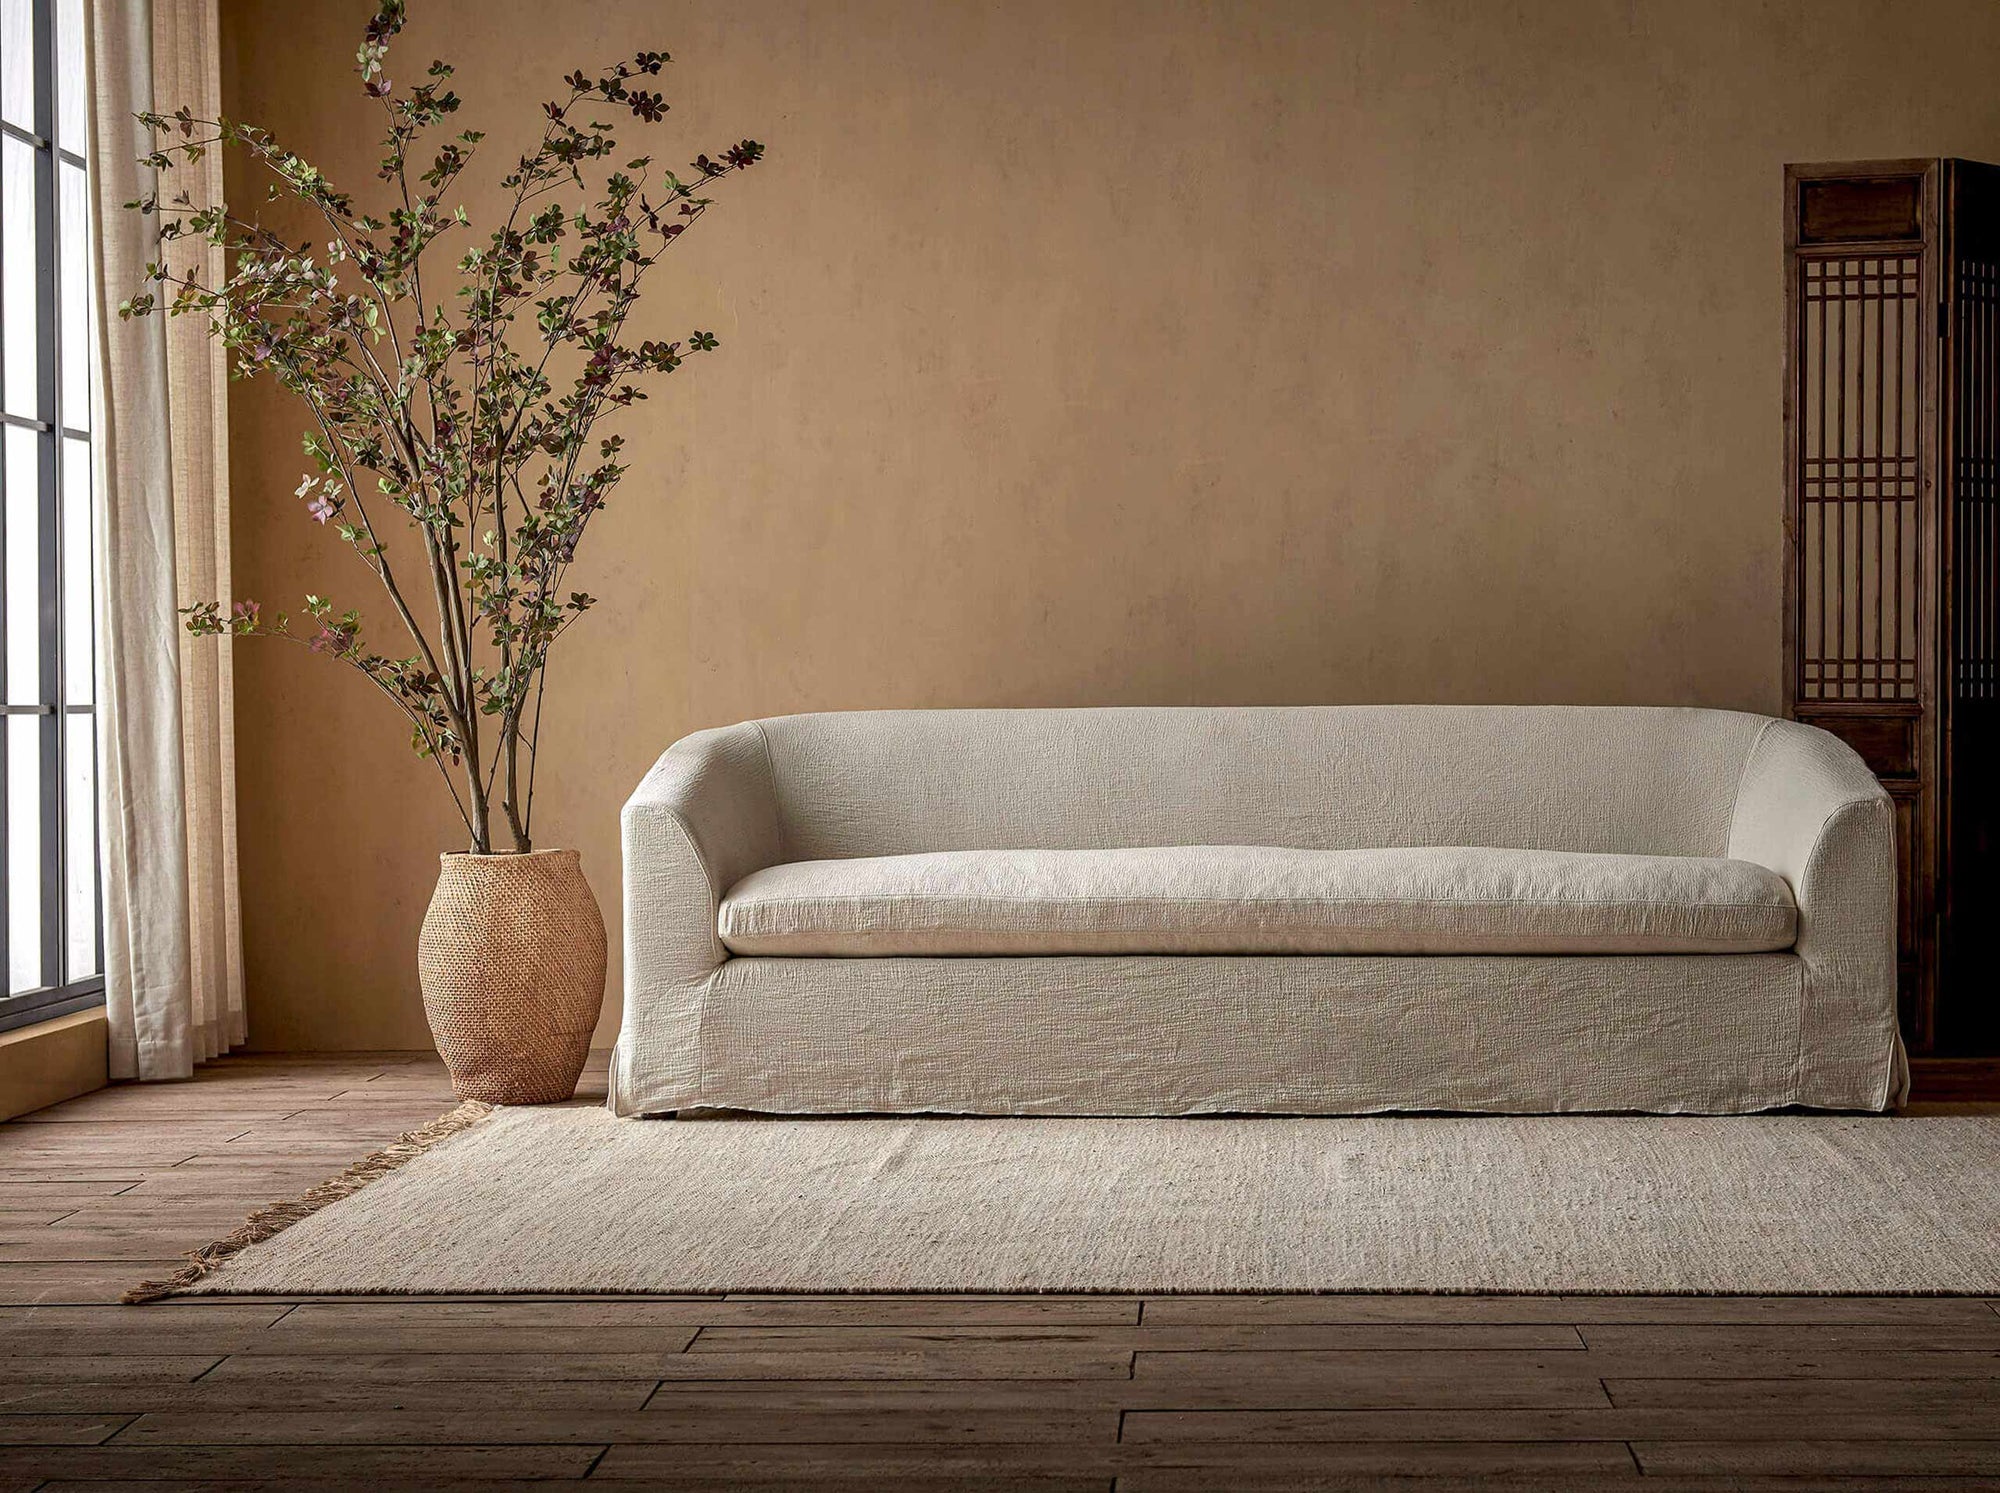 Ziki 96" Sofa in Corn Silk, a light beige Washed Cotton Linen, placed in a room next to a potted tree